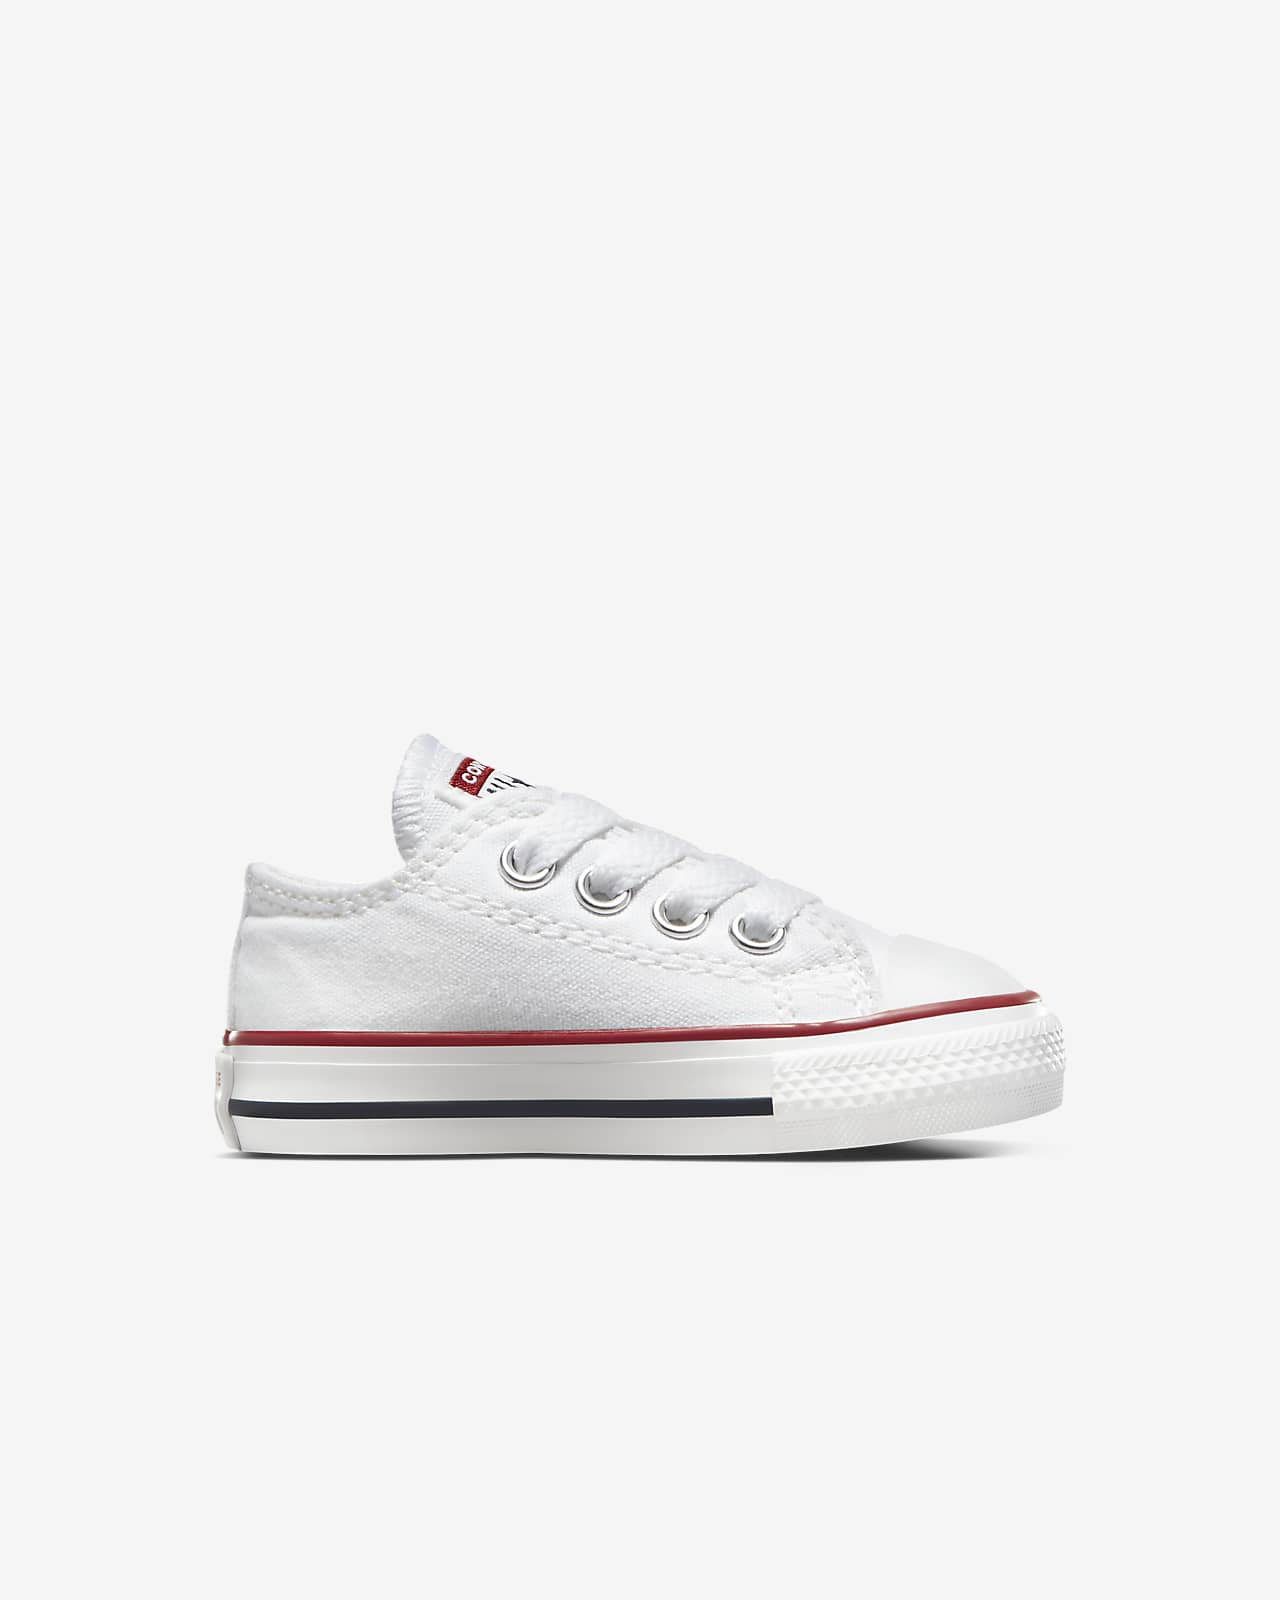 Våd Optage Uforenelig Converse Chuck Taylor All Star Low Top (2c-10c) Infant/Toddler Shoe.  Nike.com